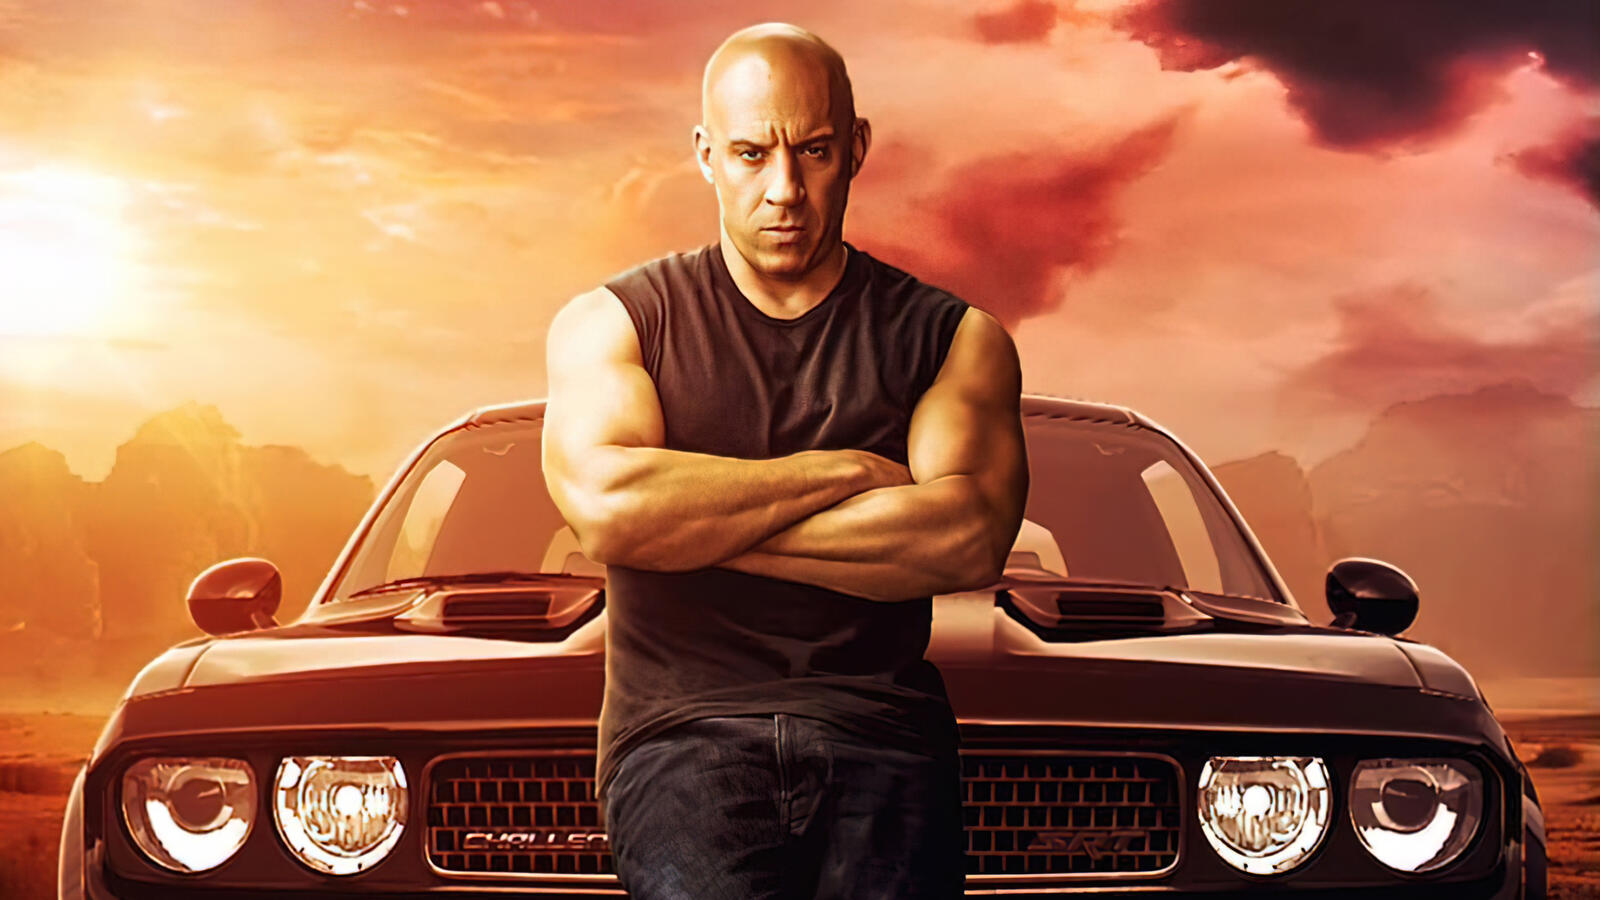 Wallpapers Fast And Furious 9 movies machine on the desktop